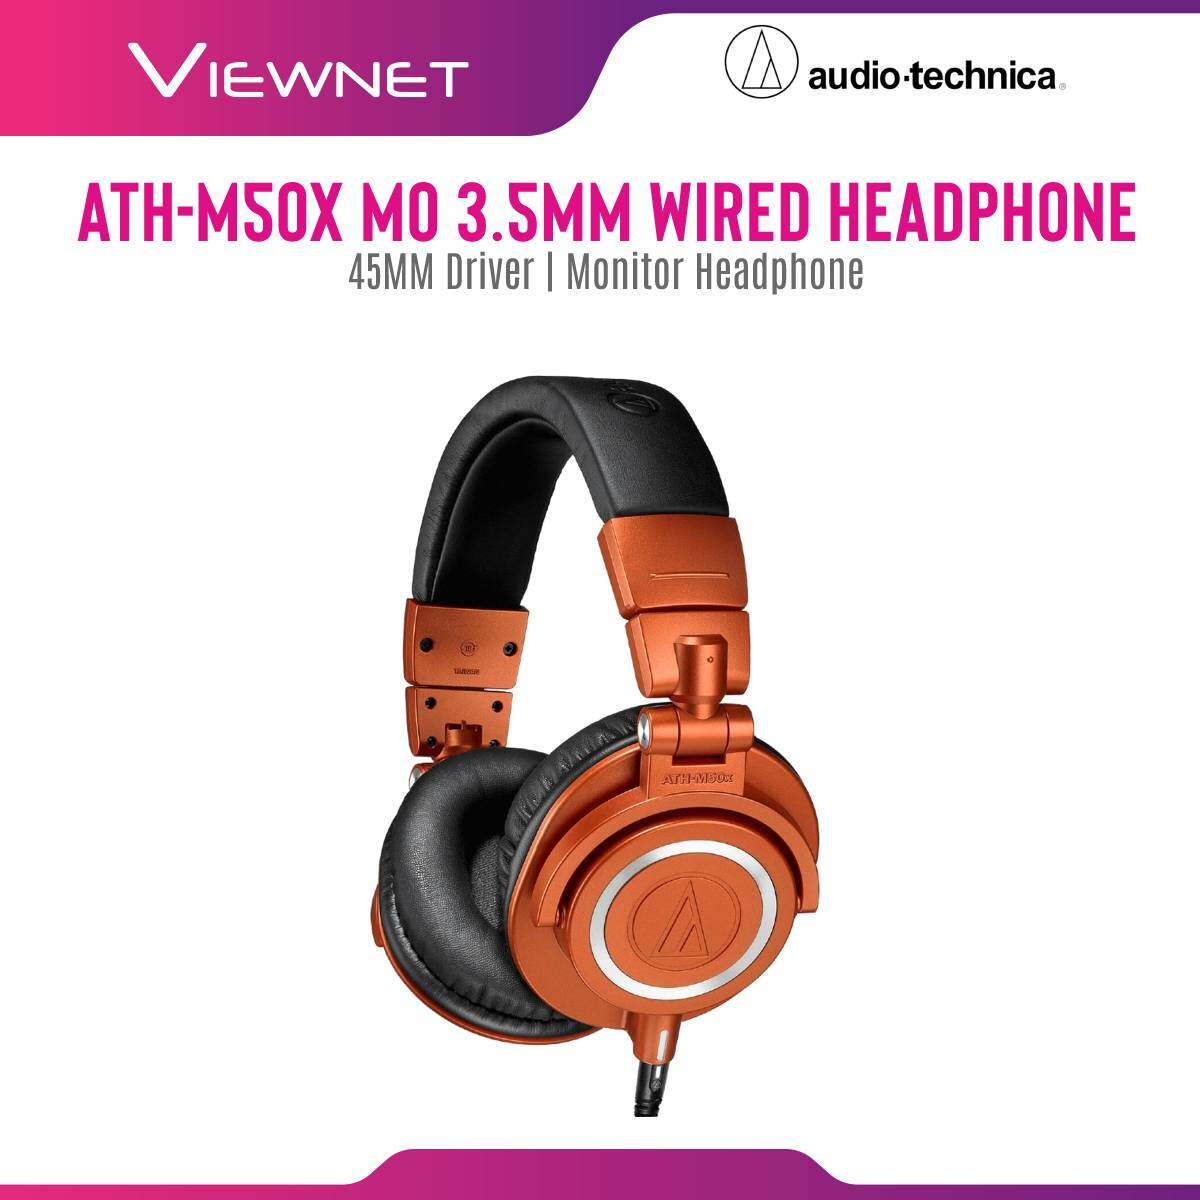 (Limited Edition) Audio-Technica Wired Headphone ATH-M50X with 3.5 mm Audio Jack, 45 mm Driver Diameter / ATH-M50X MO Lantern Glow